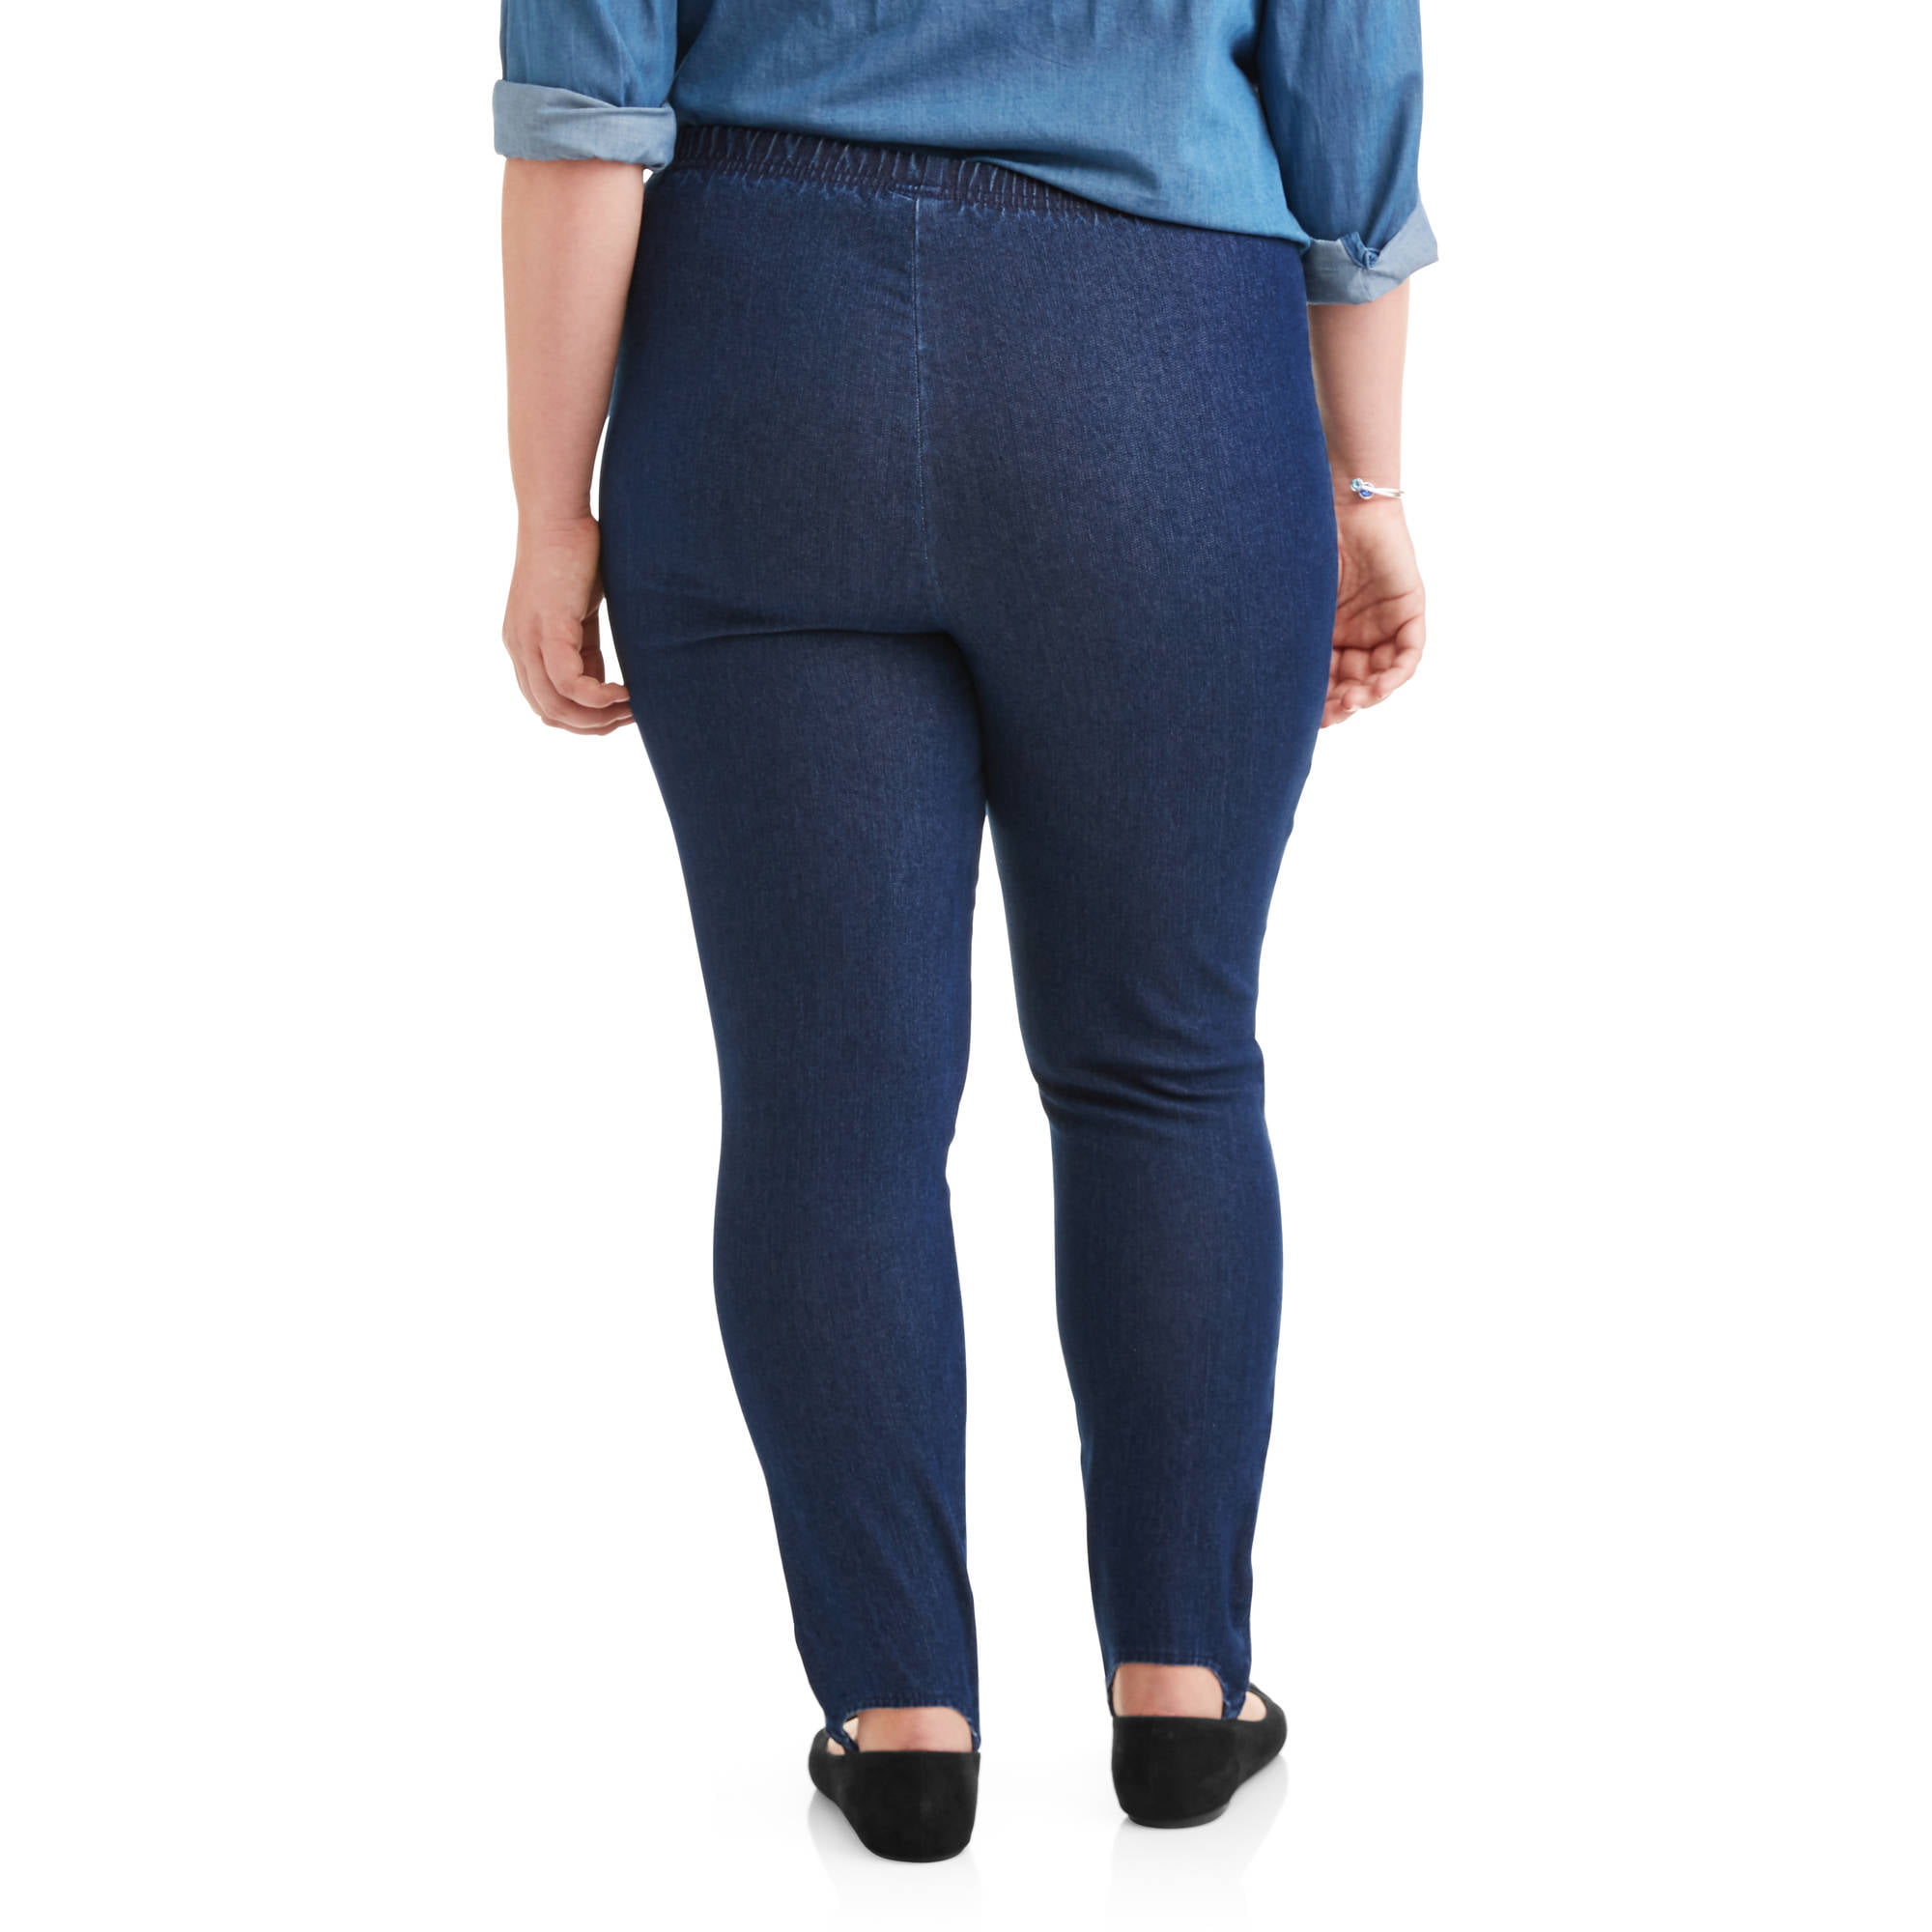 Just My Size - Women's Plus-Size Stirrup Stretch Pull-On Legging ...